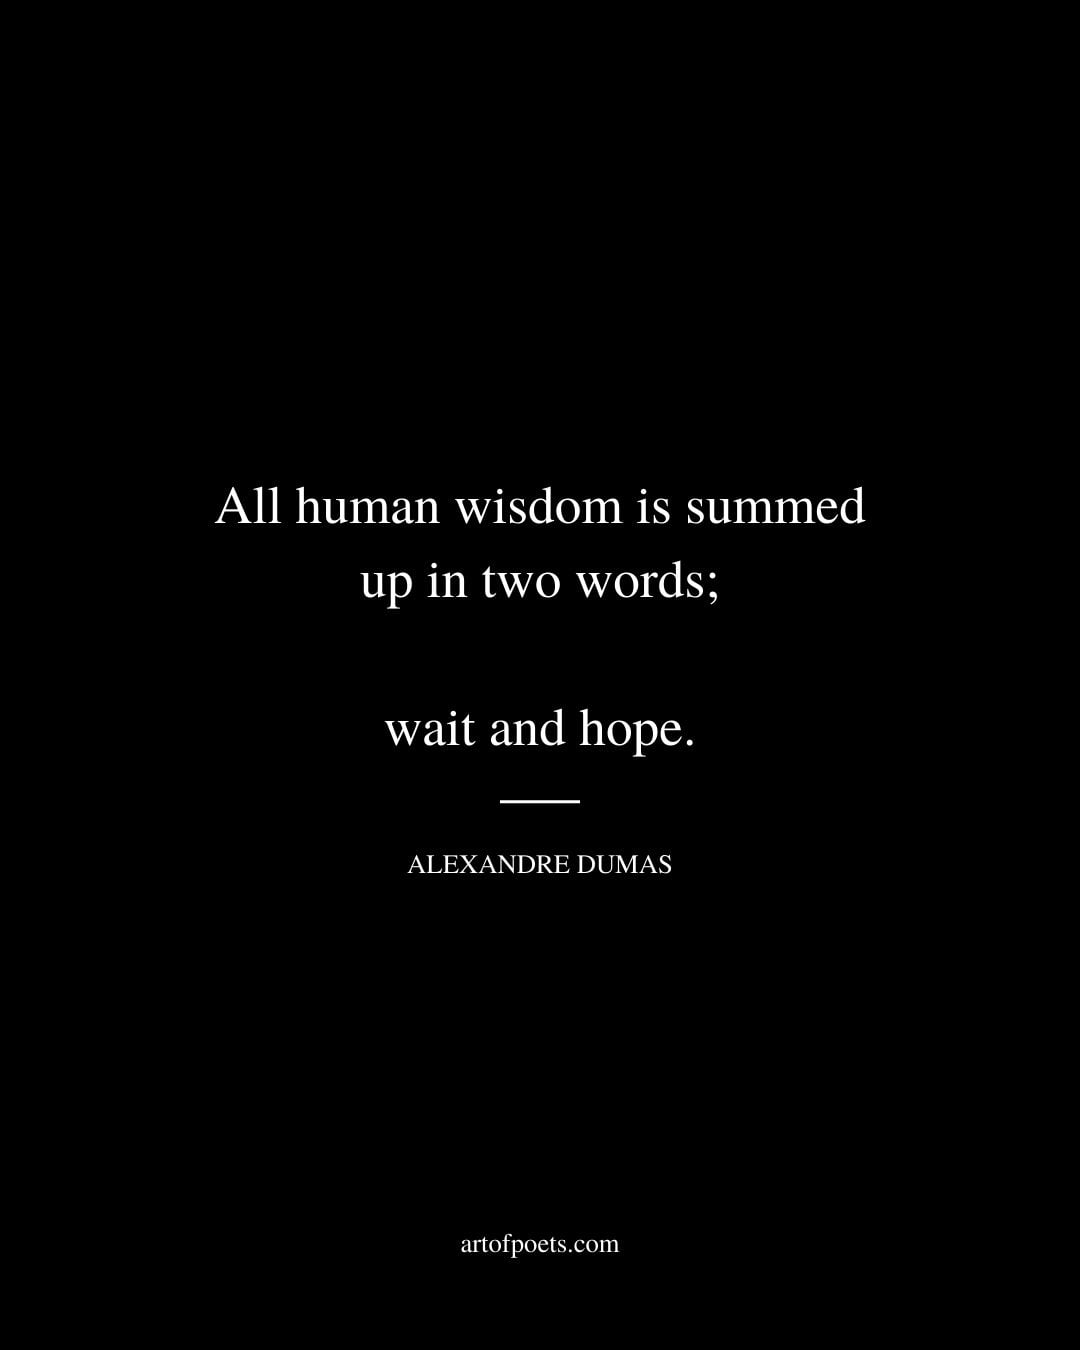 All human wisdom is summed up in two words wait and hope. Alexandre Dumas